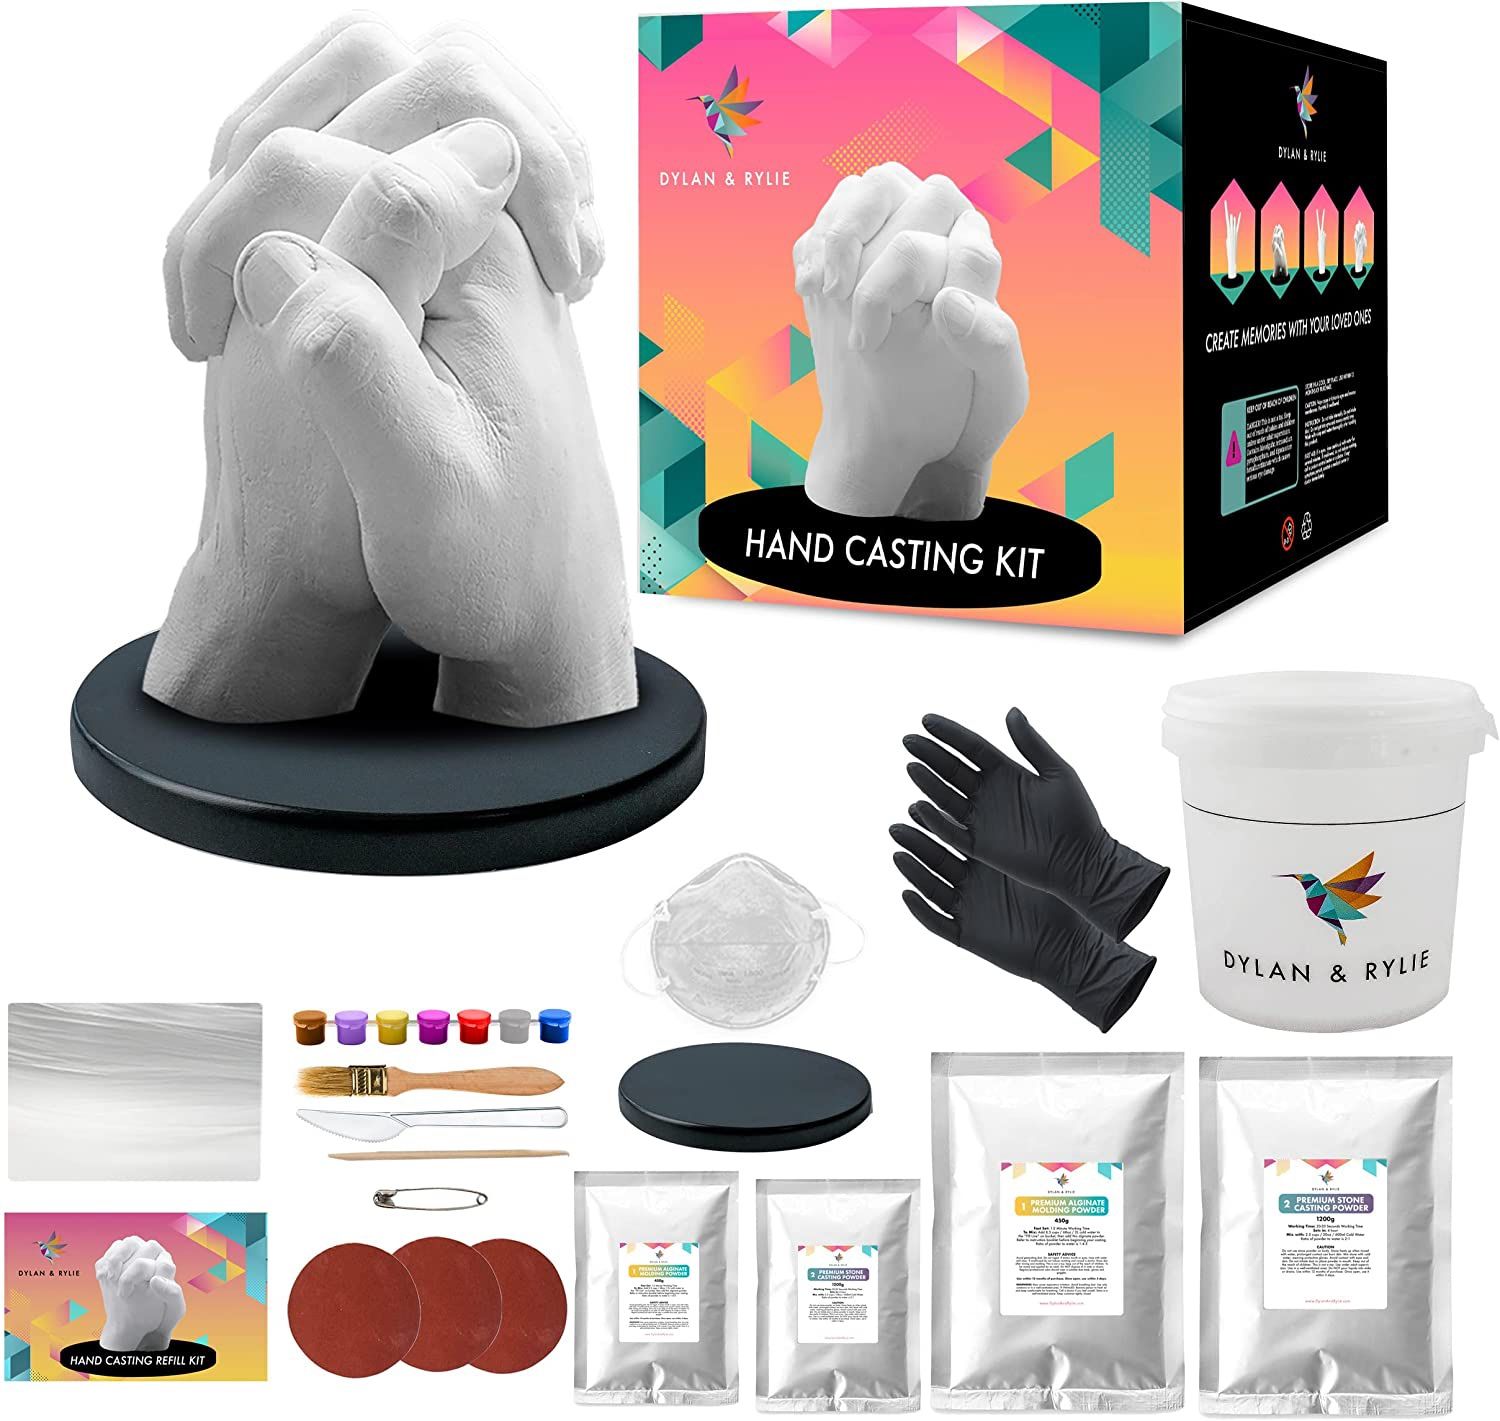 Hand casting kit couples-plaster hand mold casting kit diy kits for adults and kids wedding gifts for couples gifts for her birthday gifts for mom